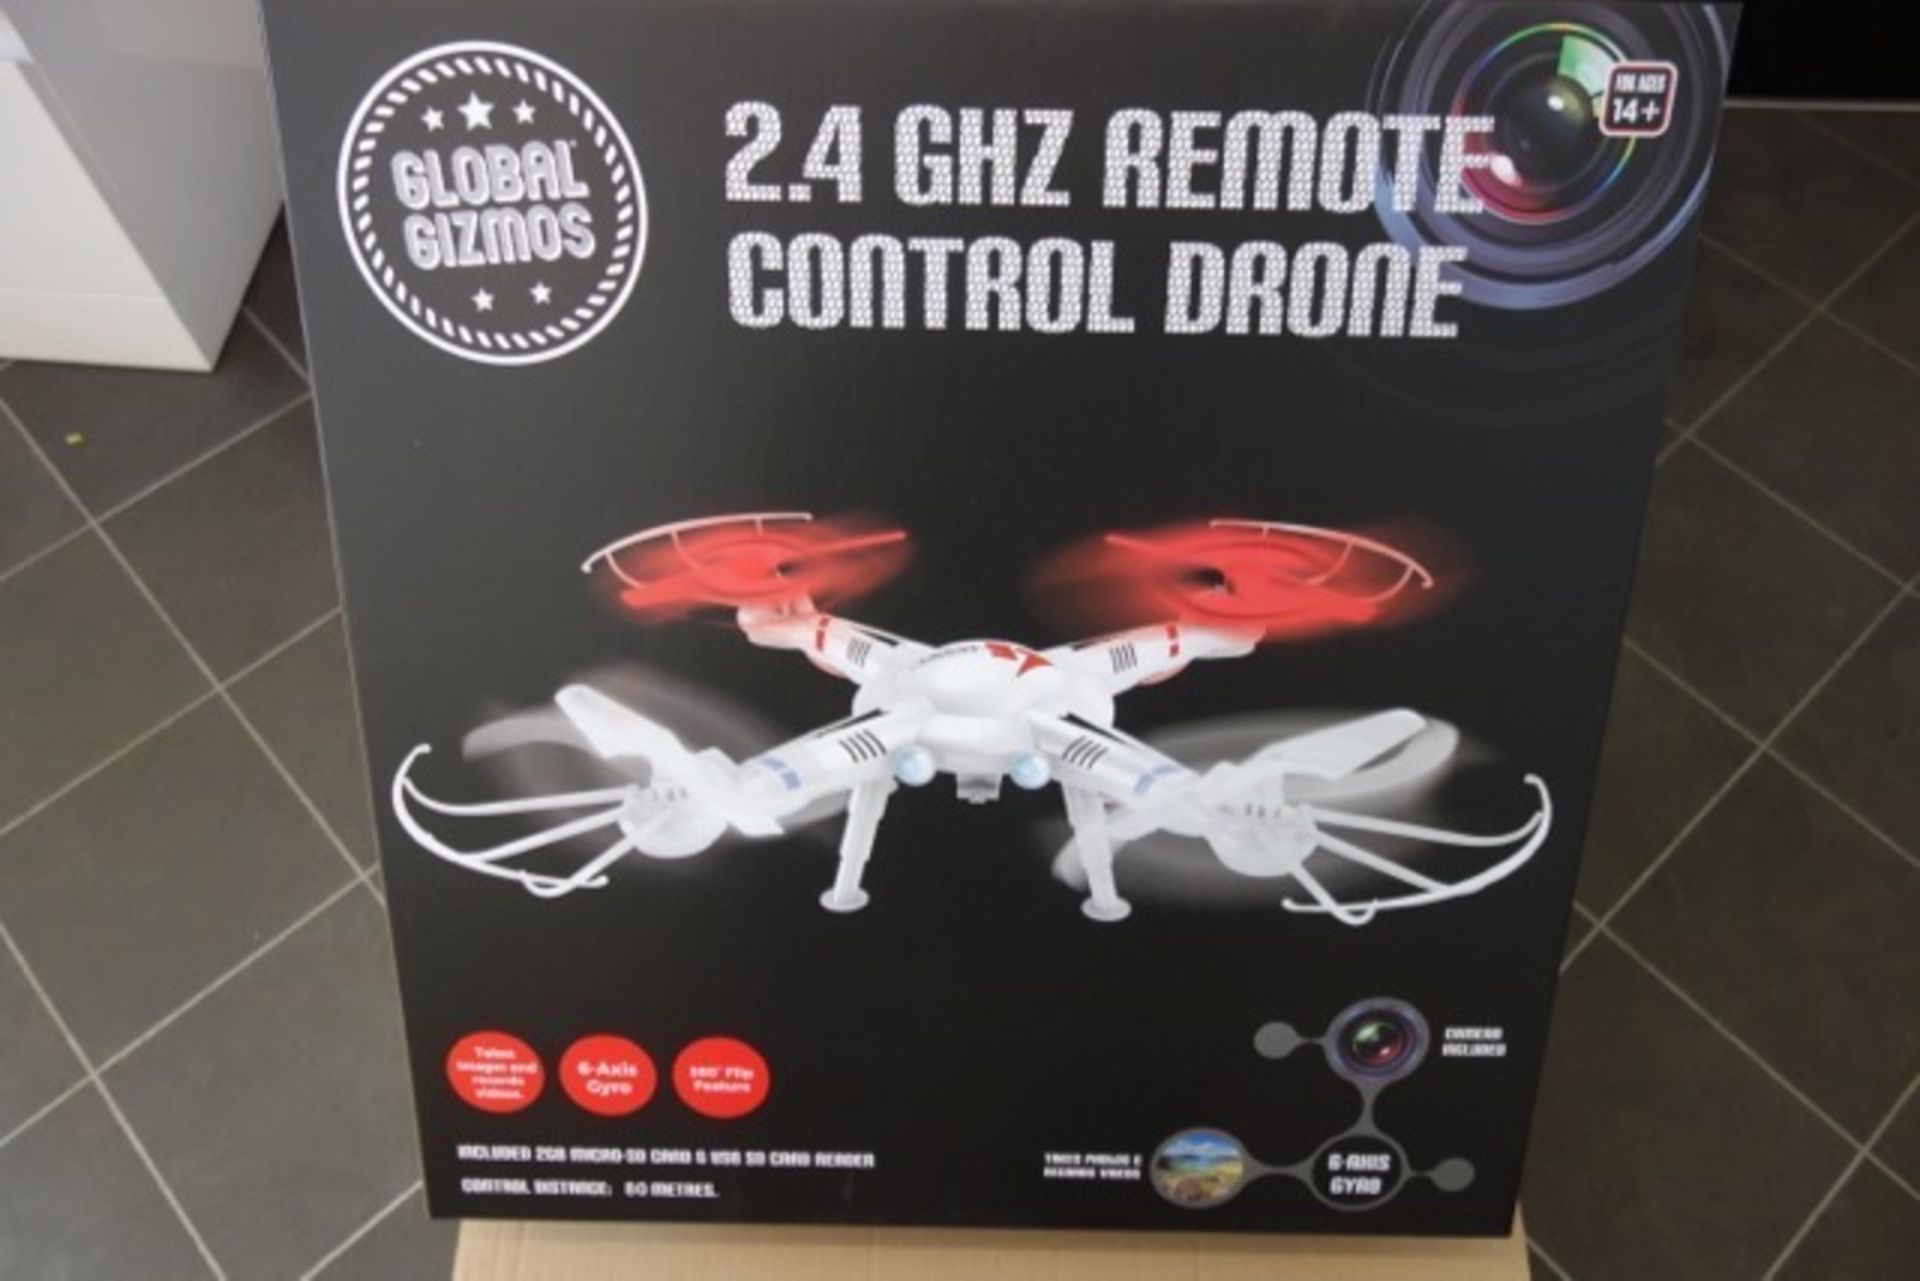 4 x Brand New Global Gizmos 2.4GHZ Remote Control Drone. Takes images & recordes videos, 6 axis - Image 4 of 4